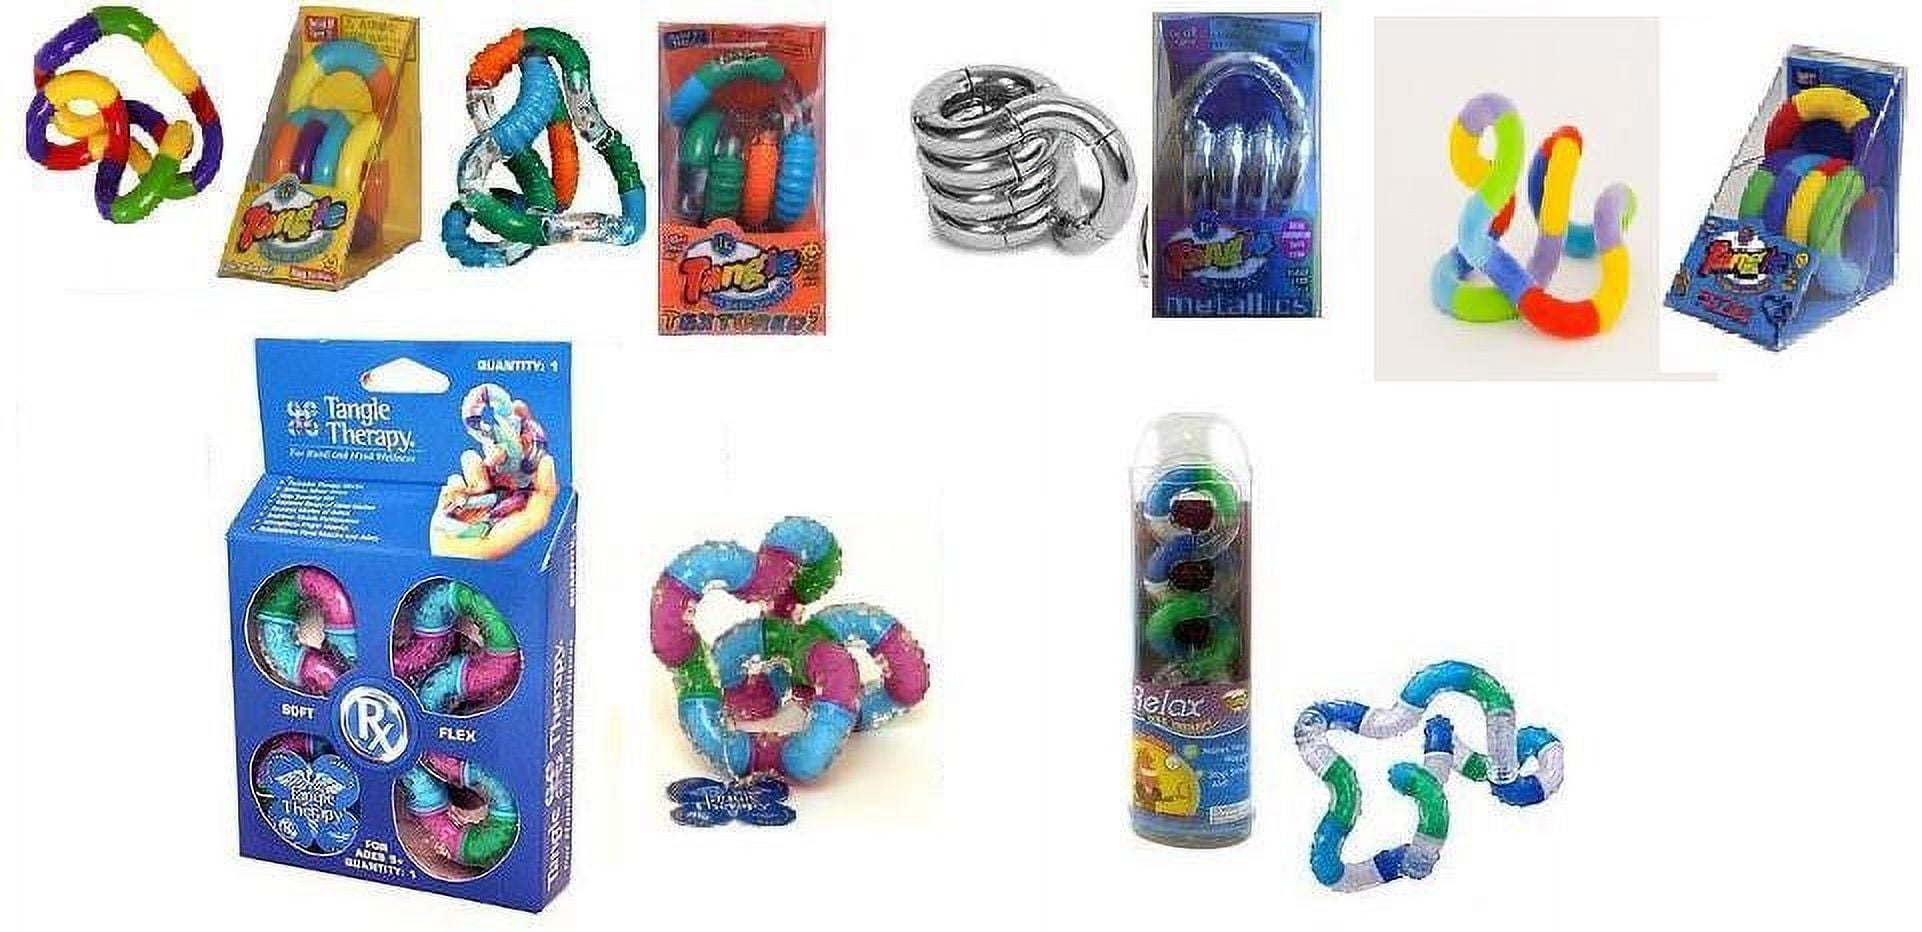 Toymendous Stretch Creatures - 3 Textured Stretchy String Fidget Sensory Toys, Pink Green Blue | Ages Kids 3+, Size: One Size